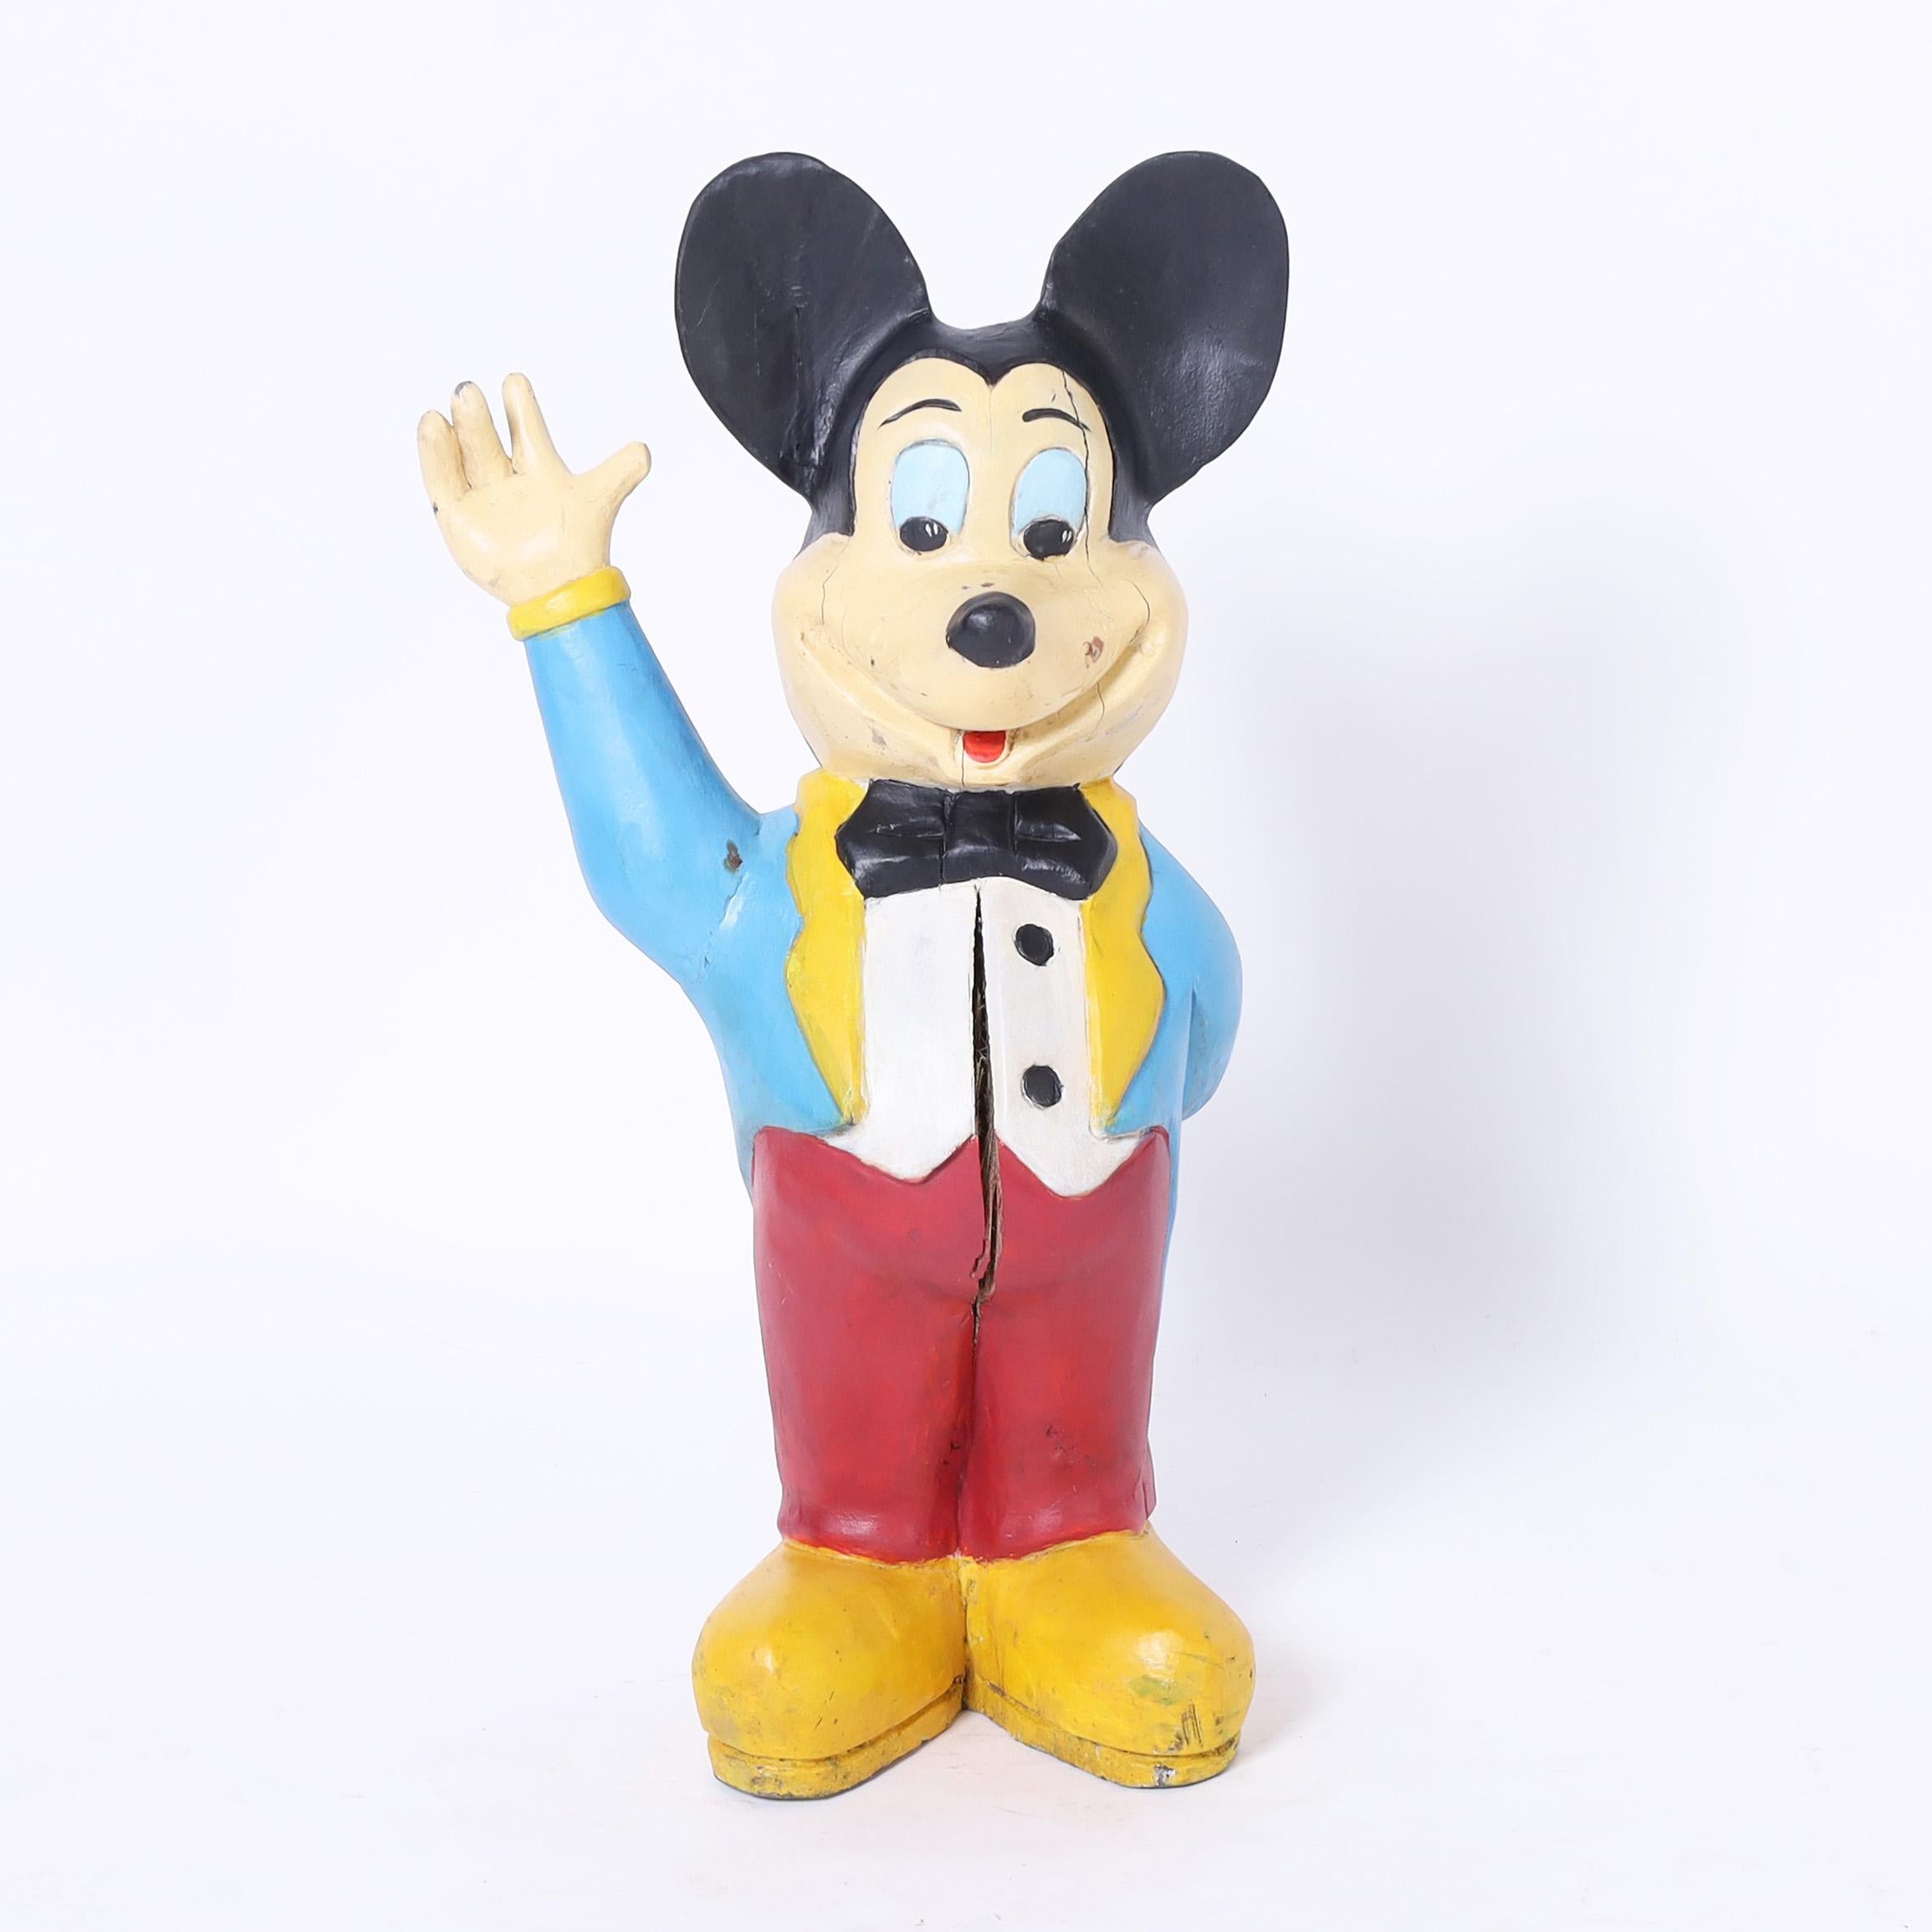 Whimsical Mickey Mouse wood sculpture hand carved and painted in his blue tuxedo. 